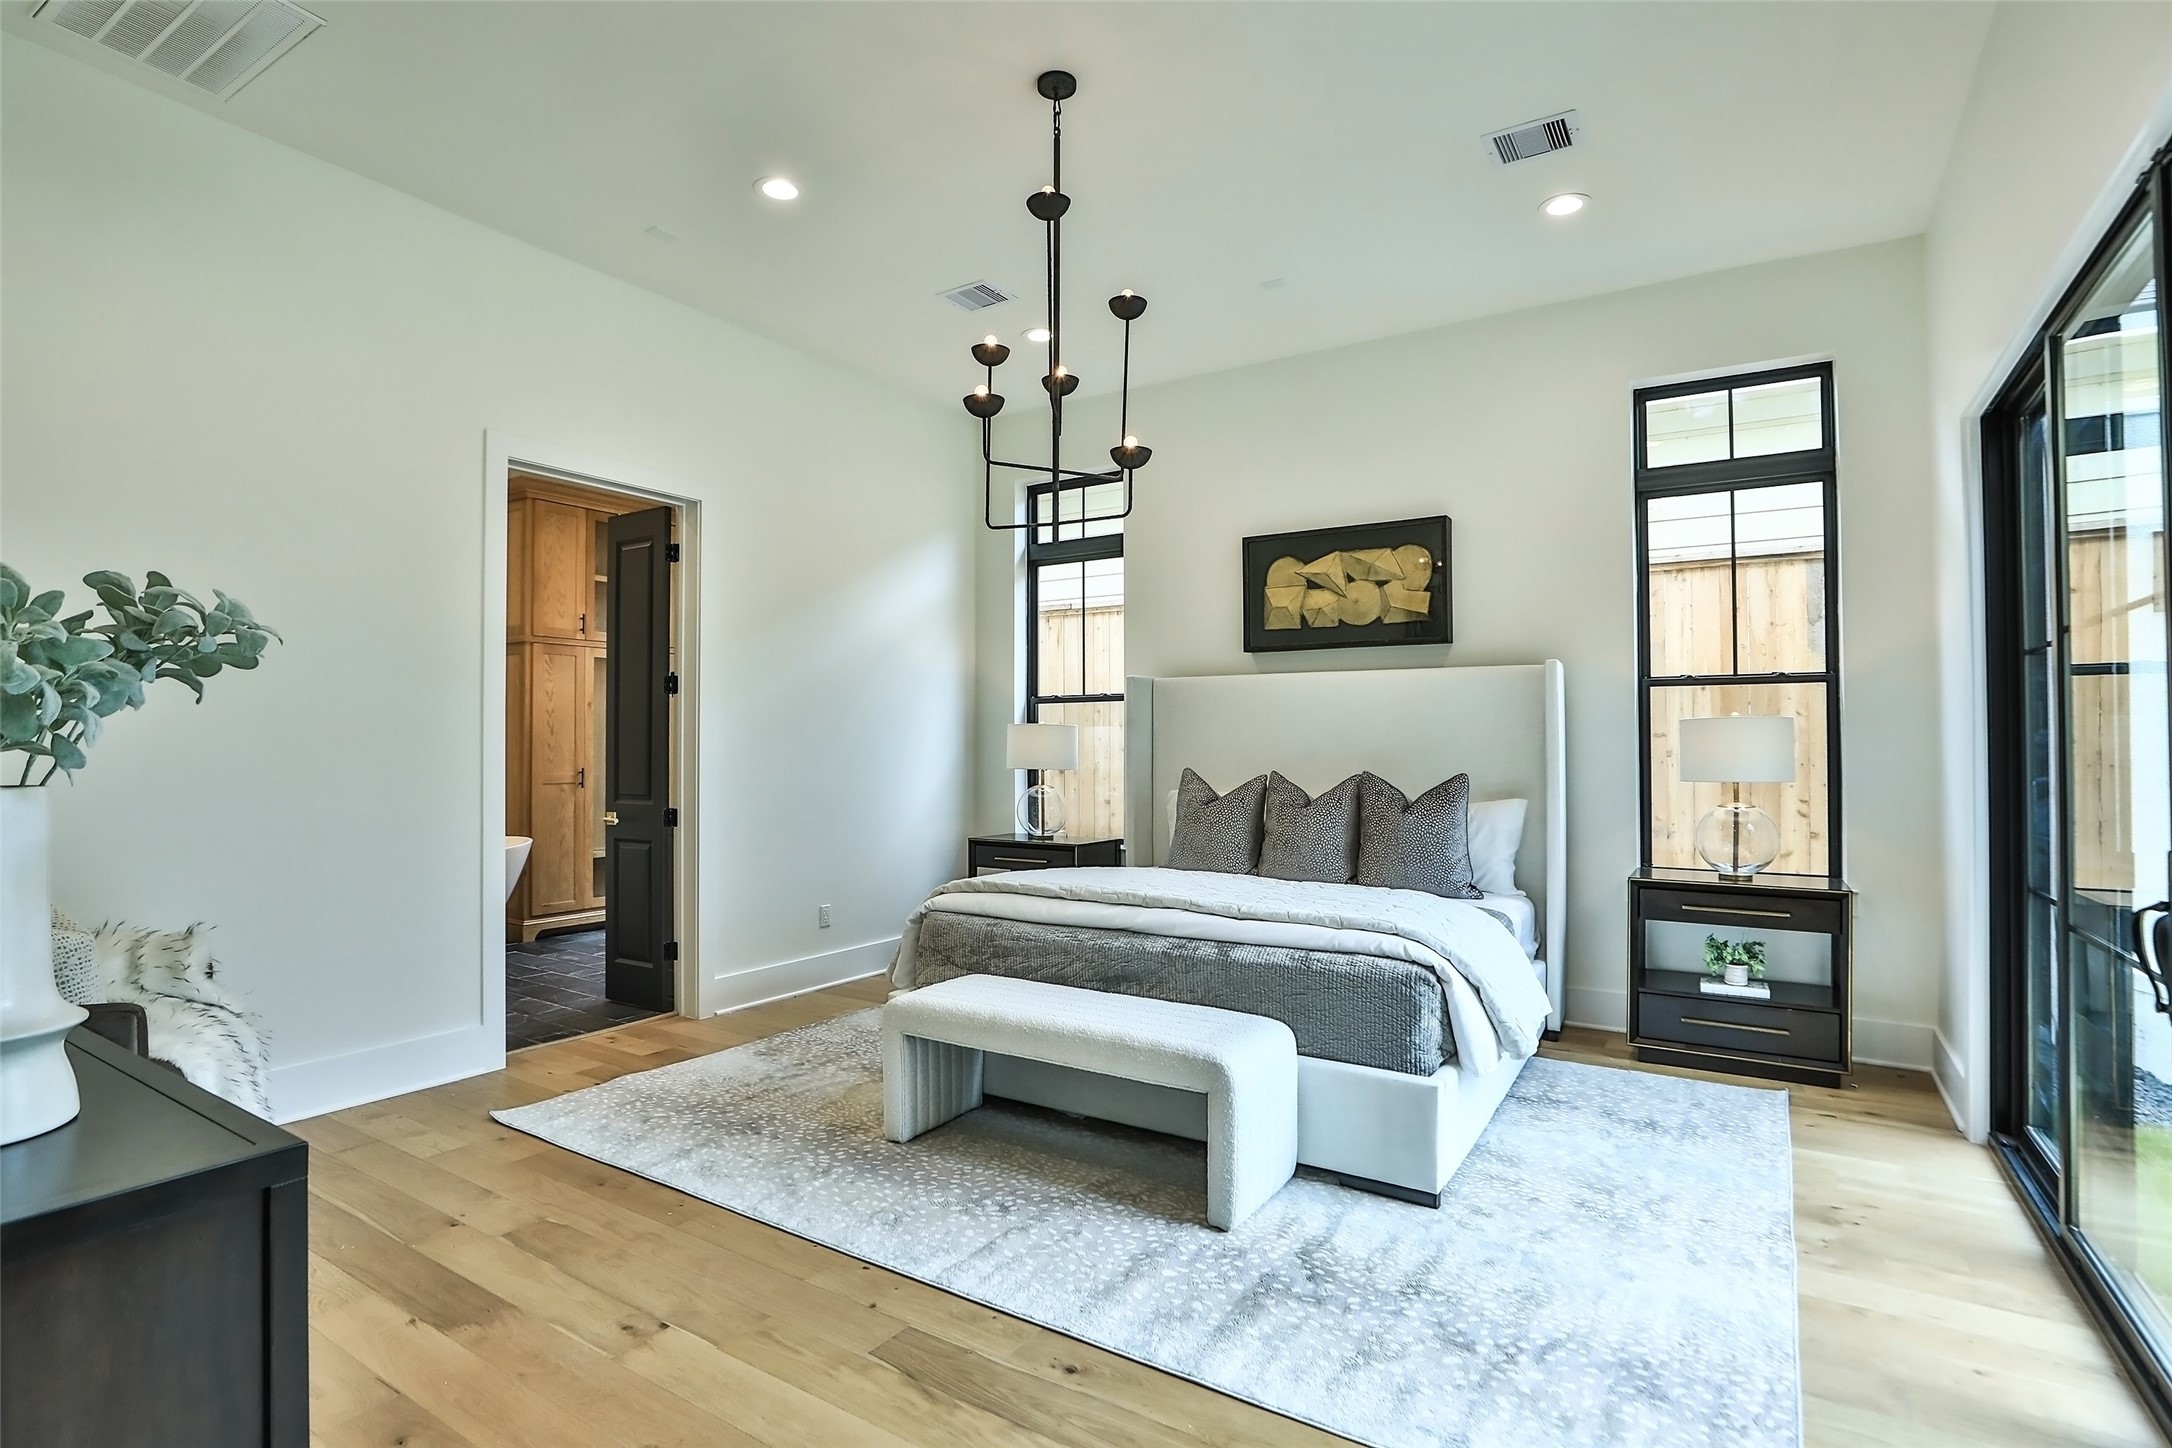 The primary bedroom is in a private location in the back of the home. The room features a classic hammered wrought iron chandelier and White Oak Engineered hard wood floors.